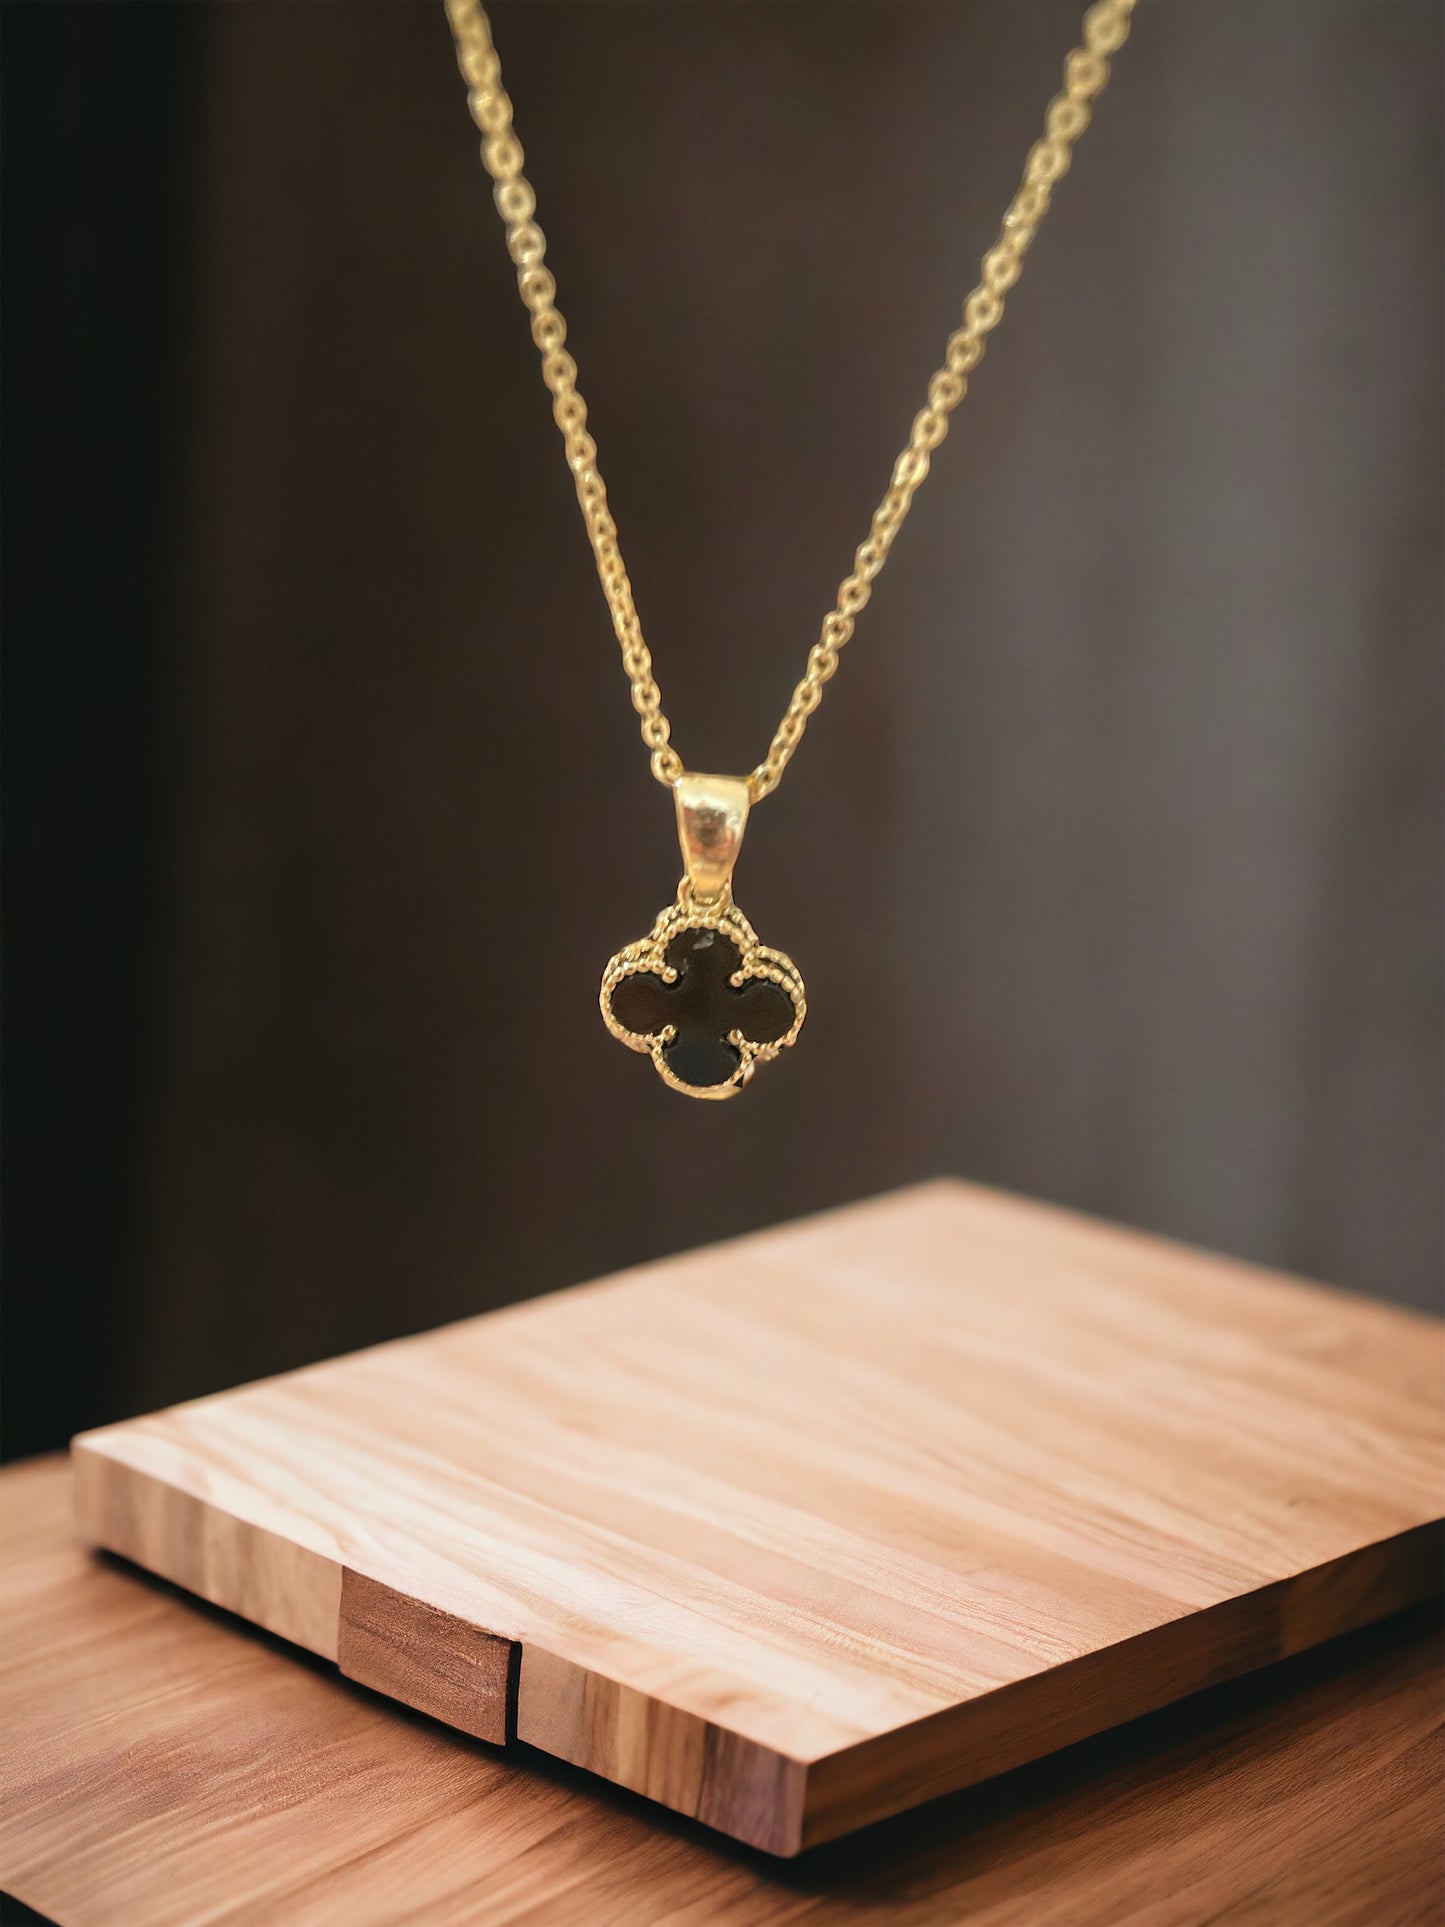 Clover Charm Gold Tone Necklace